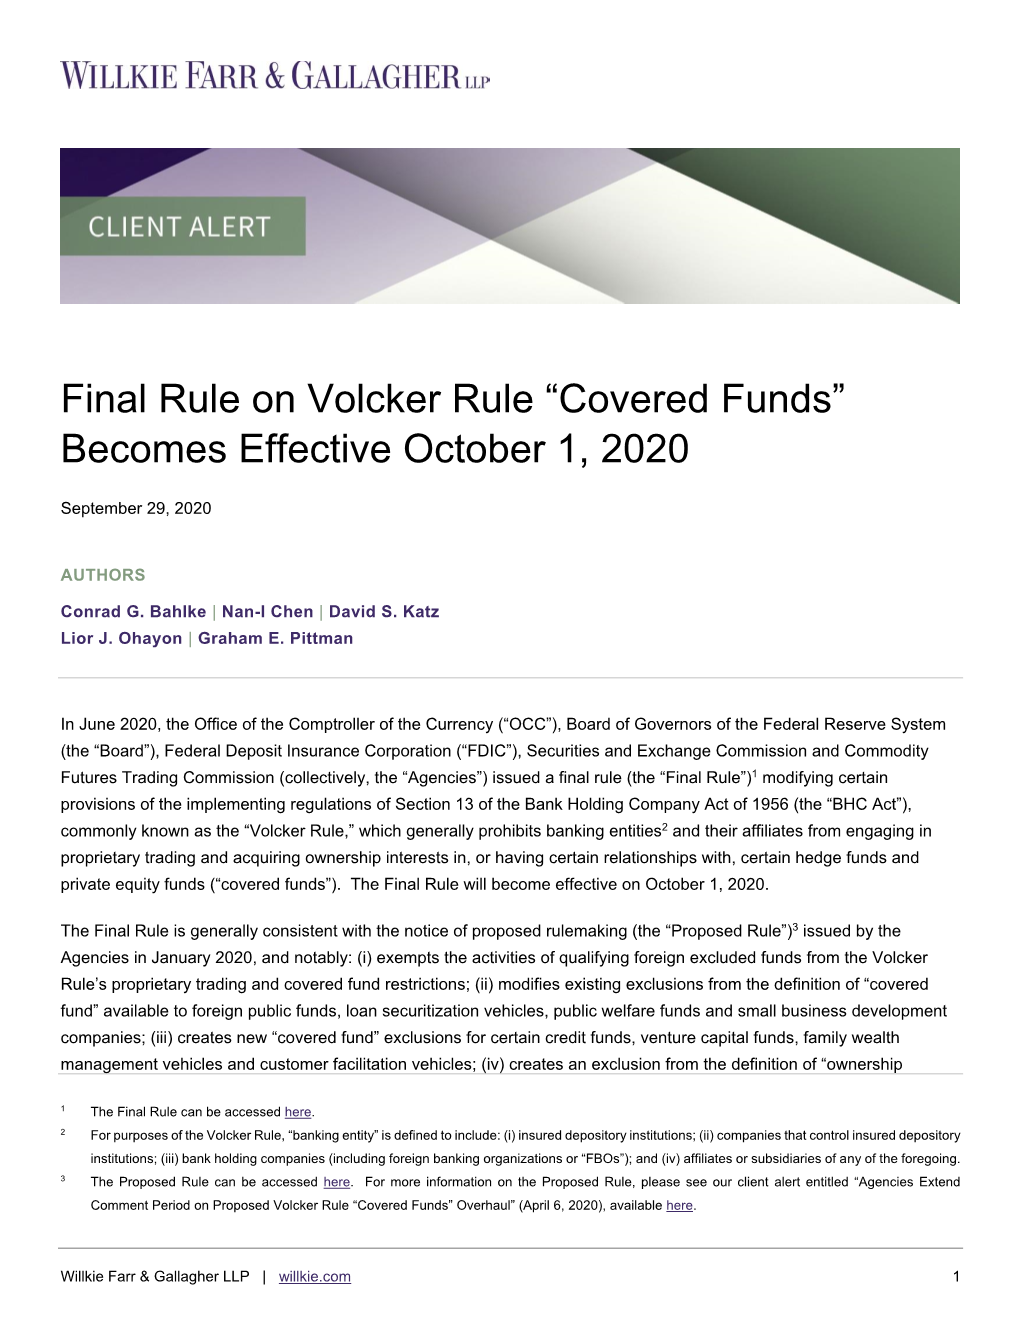 Final Rule on Volcker Rule “Covered Funds” Becomes Effective October 1, 2020